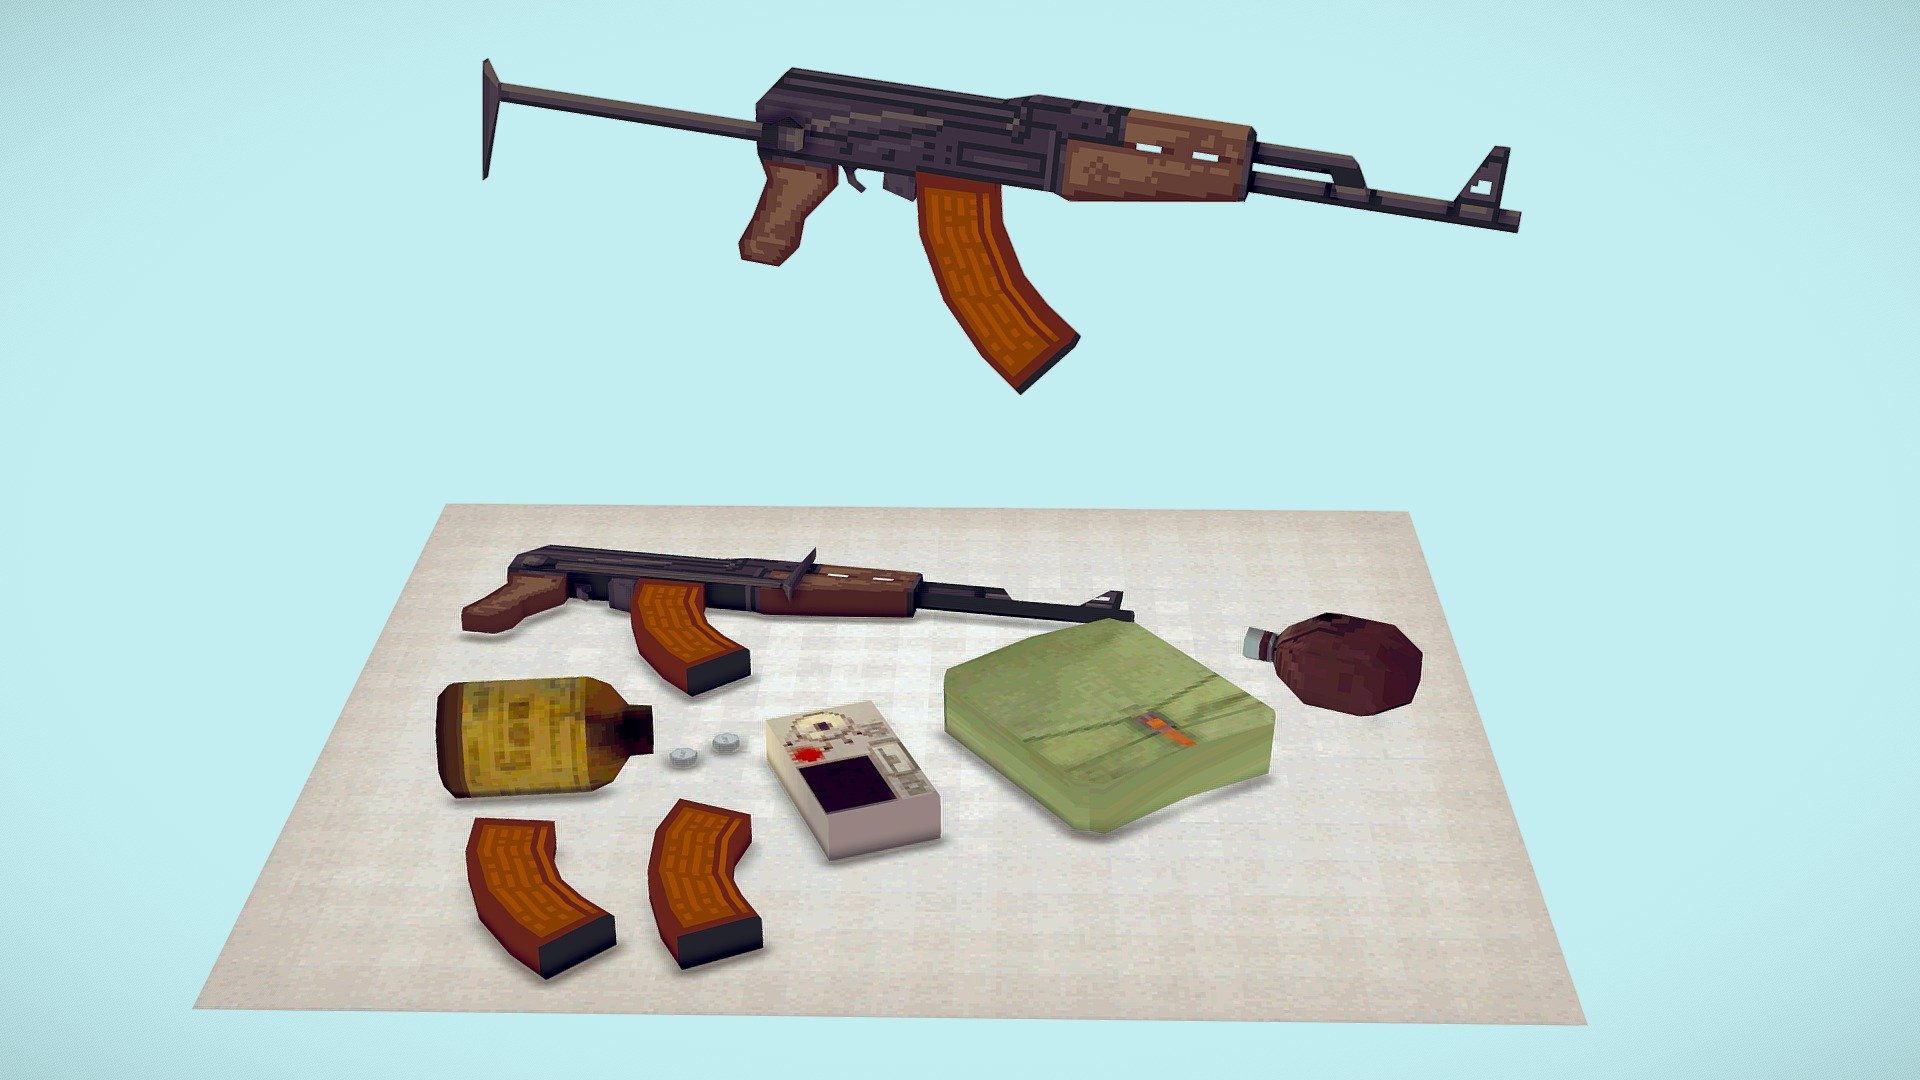 Soviet era AK-47 with folding stock, modeled with exactly 128 faces and a single 128x128 texture. Game ready asset with additional accessories bundled.

Includes:

1x 128 polygon &amp; 128 texture folding stock AK-47

1x ДП-64/DP-64 Soviet civil defense geiger counter/indicator

1x Soviet gasmask bag

1x Iod (Iodine) glass pill bottle + pills

1x Leather military canteen

1x Babushka cloth - 128 Polygon AK-47 + Soviet Military Accessories - Buy Royalty Free 3D model by Wave Design (@231225) 3d model